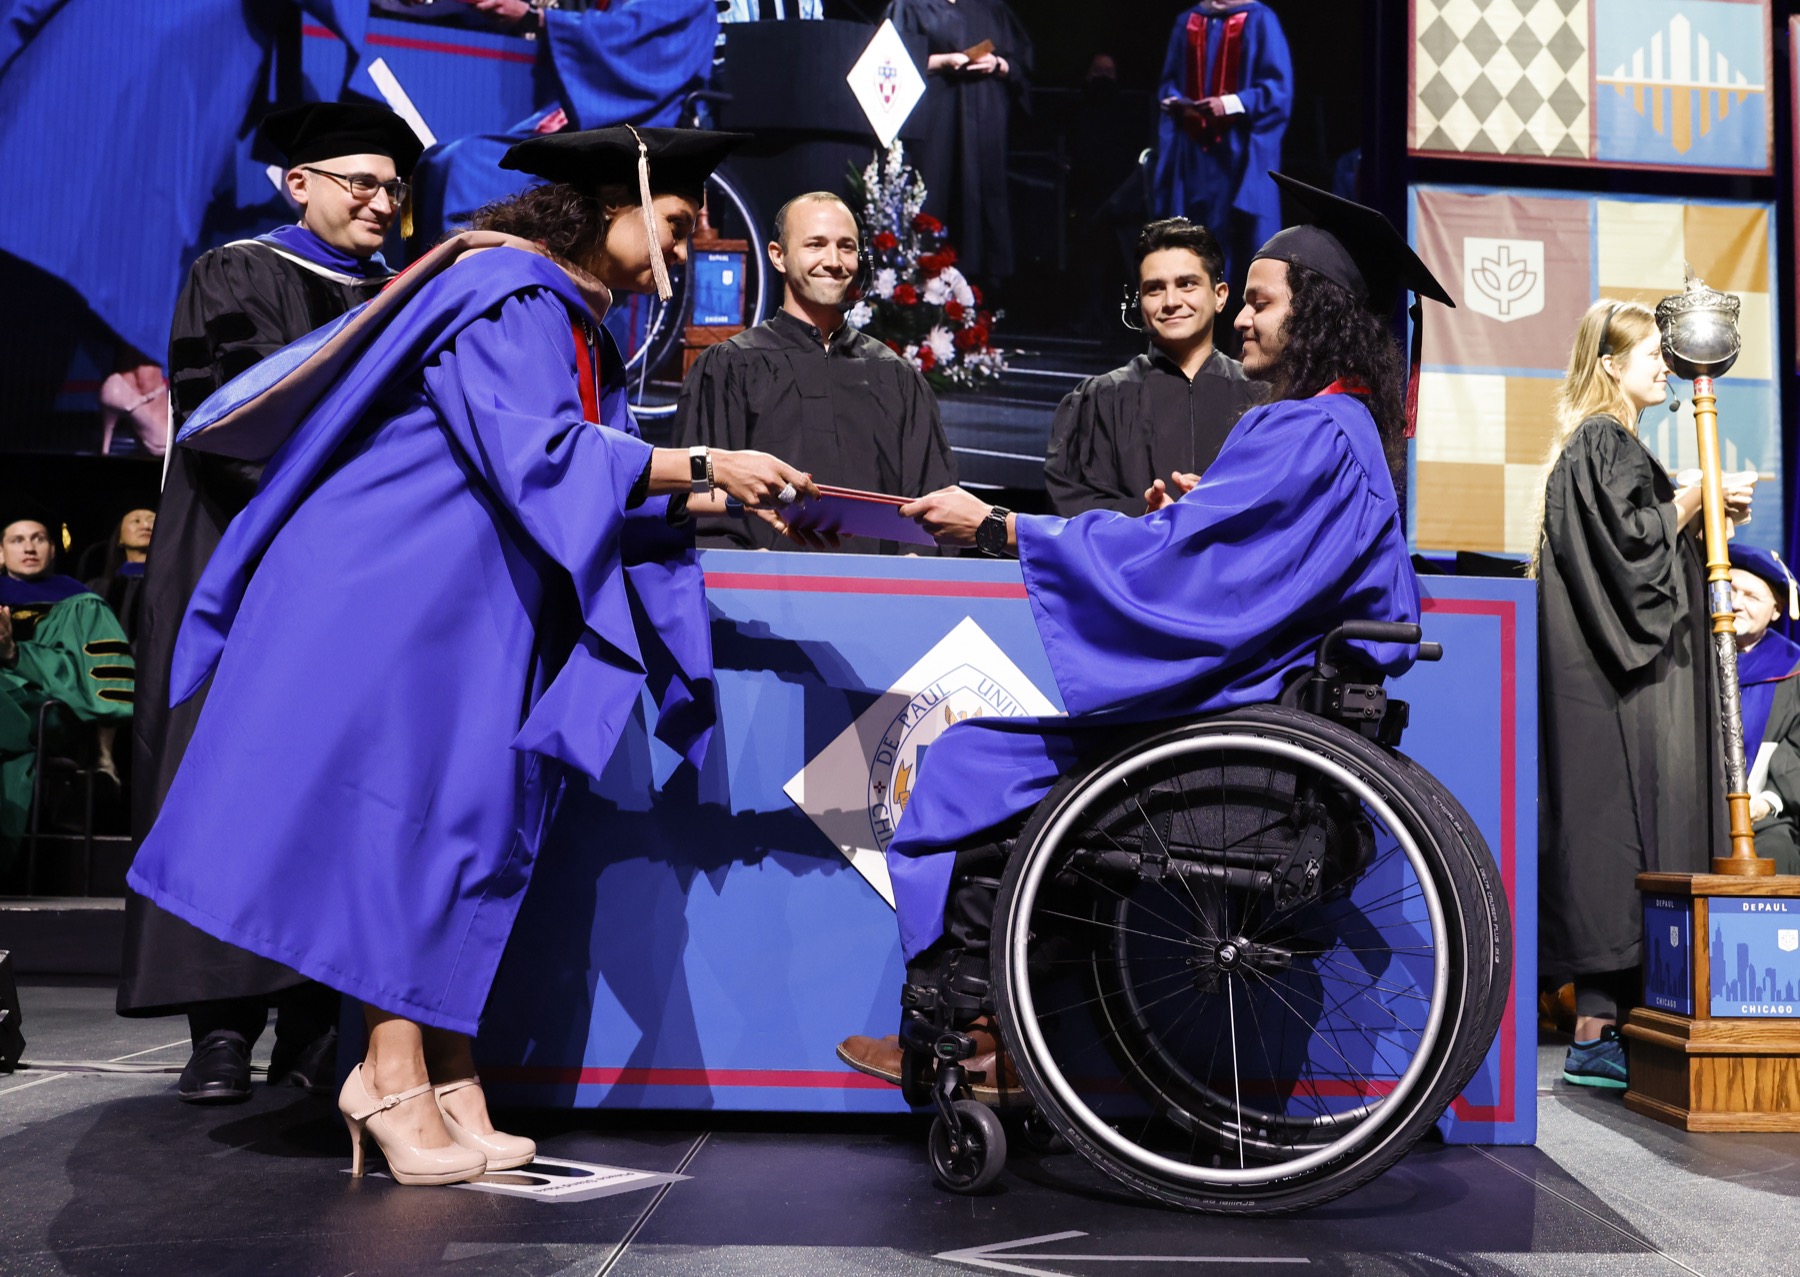 Graduate Linda Annicks, presented her son, Jonathan Annicks, his degree at the DePaul University commencement ceremony for the Kellstadt Graduate School of Business.